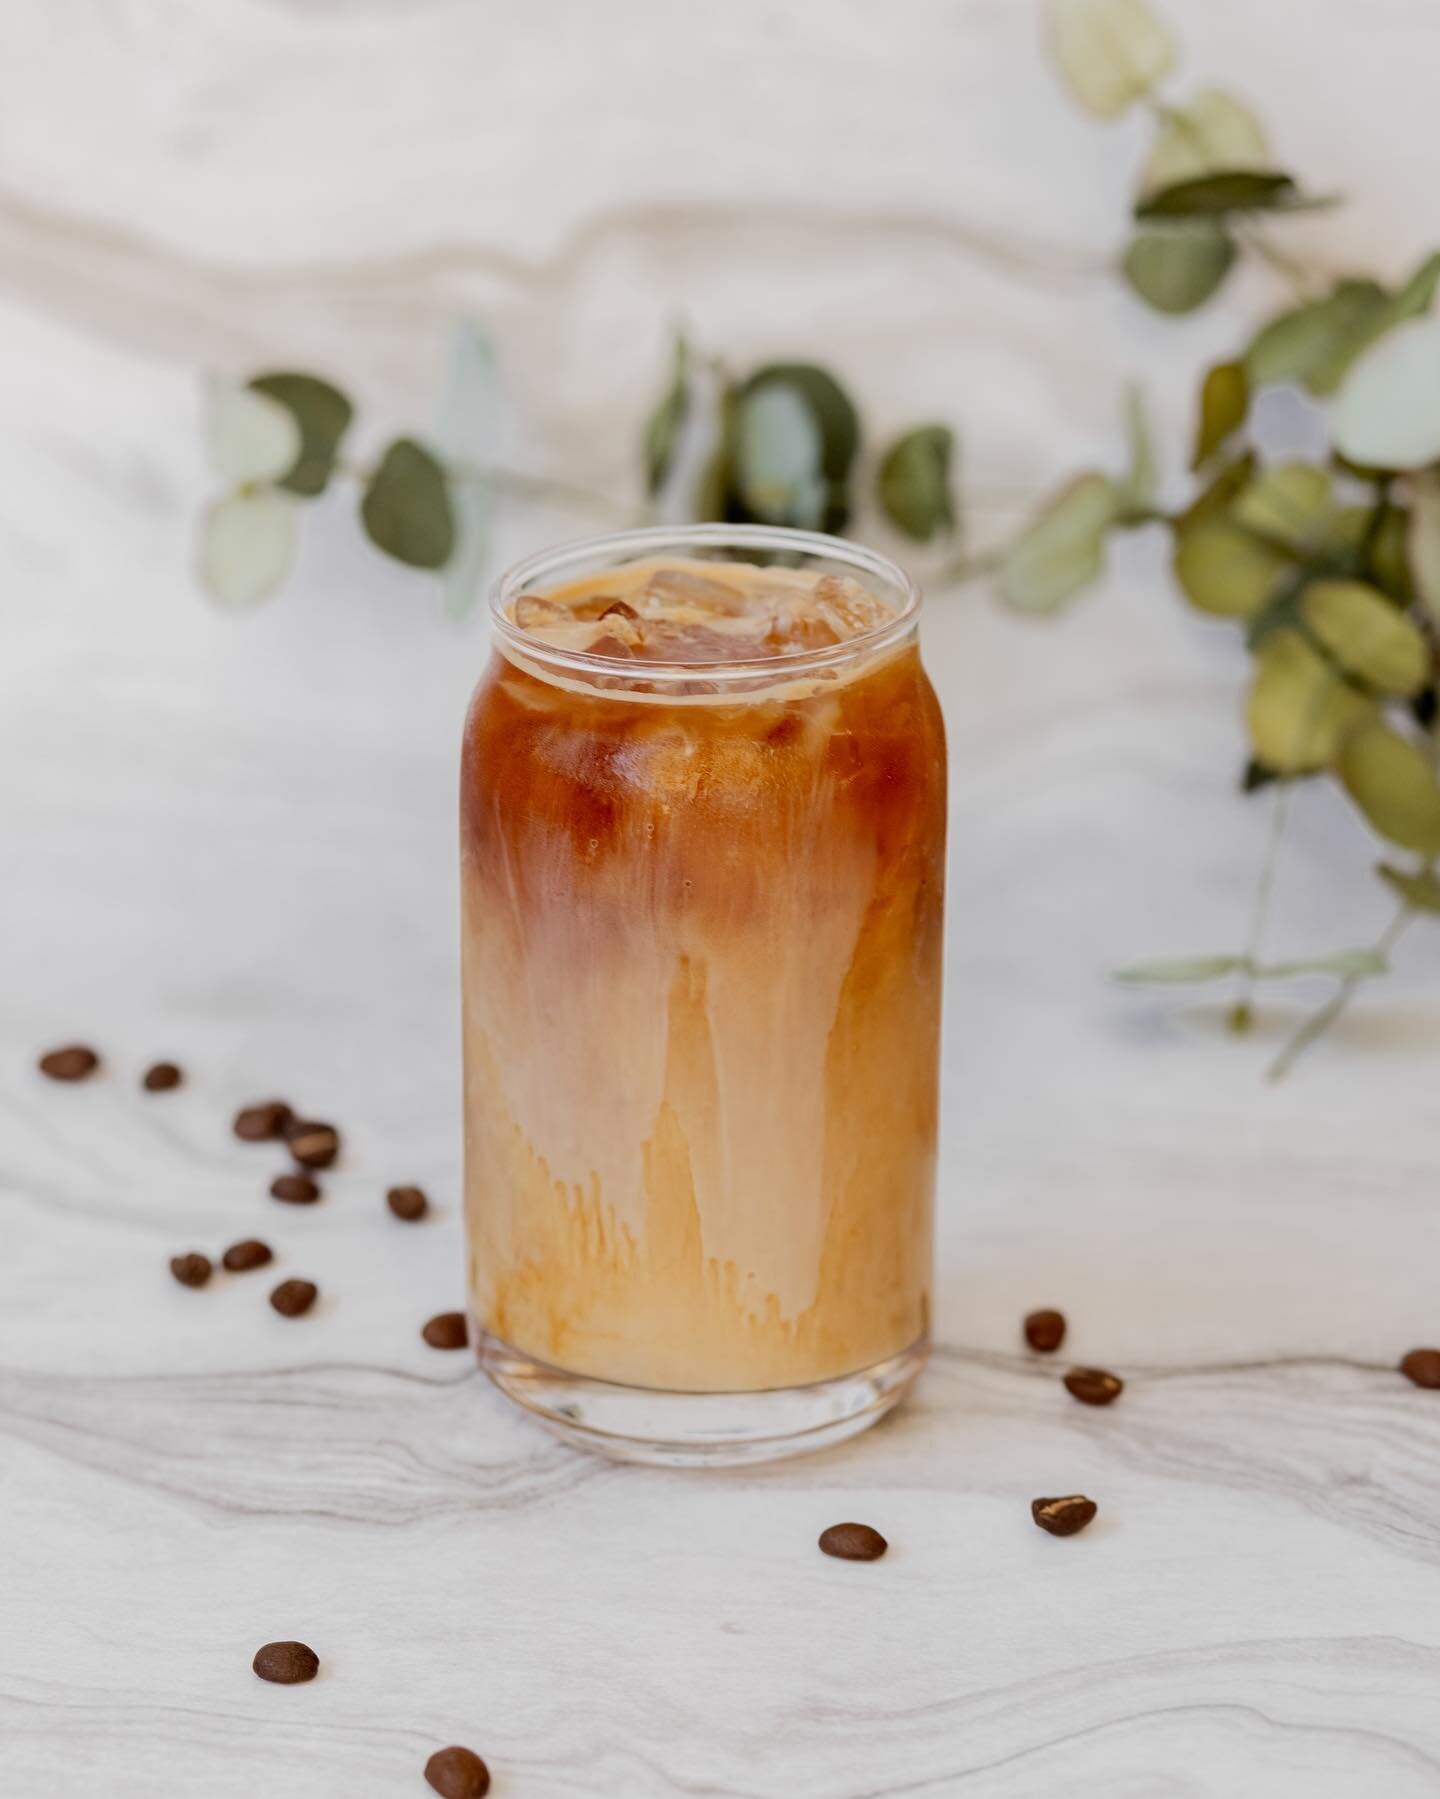 Happy Easter, friends!

Re-introducing a staple drink at Yonder, the Agave Love.

Agave Love is our very first specialty drink back during our coffee cart days. It&rsquo;s a word play on the Greek word &ldquo;Agape&rdquo; (which means unconditional l